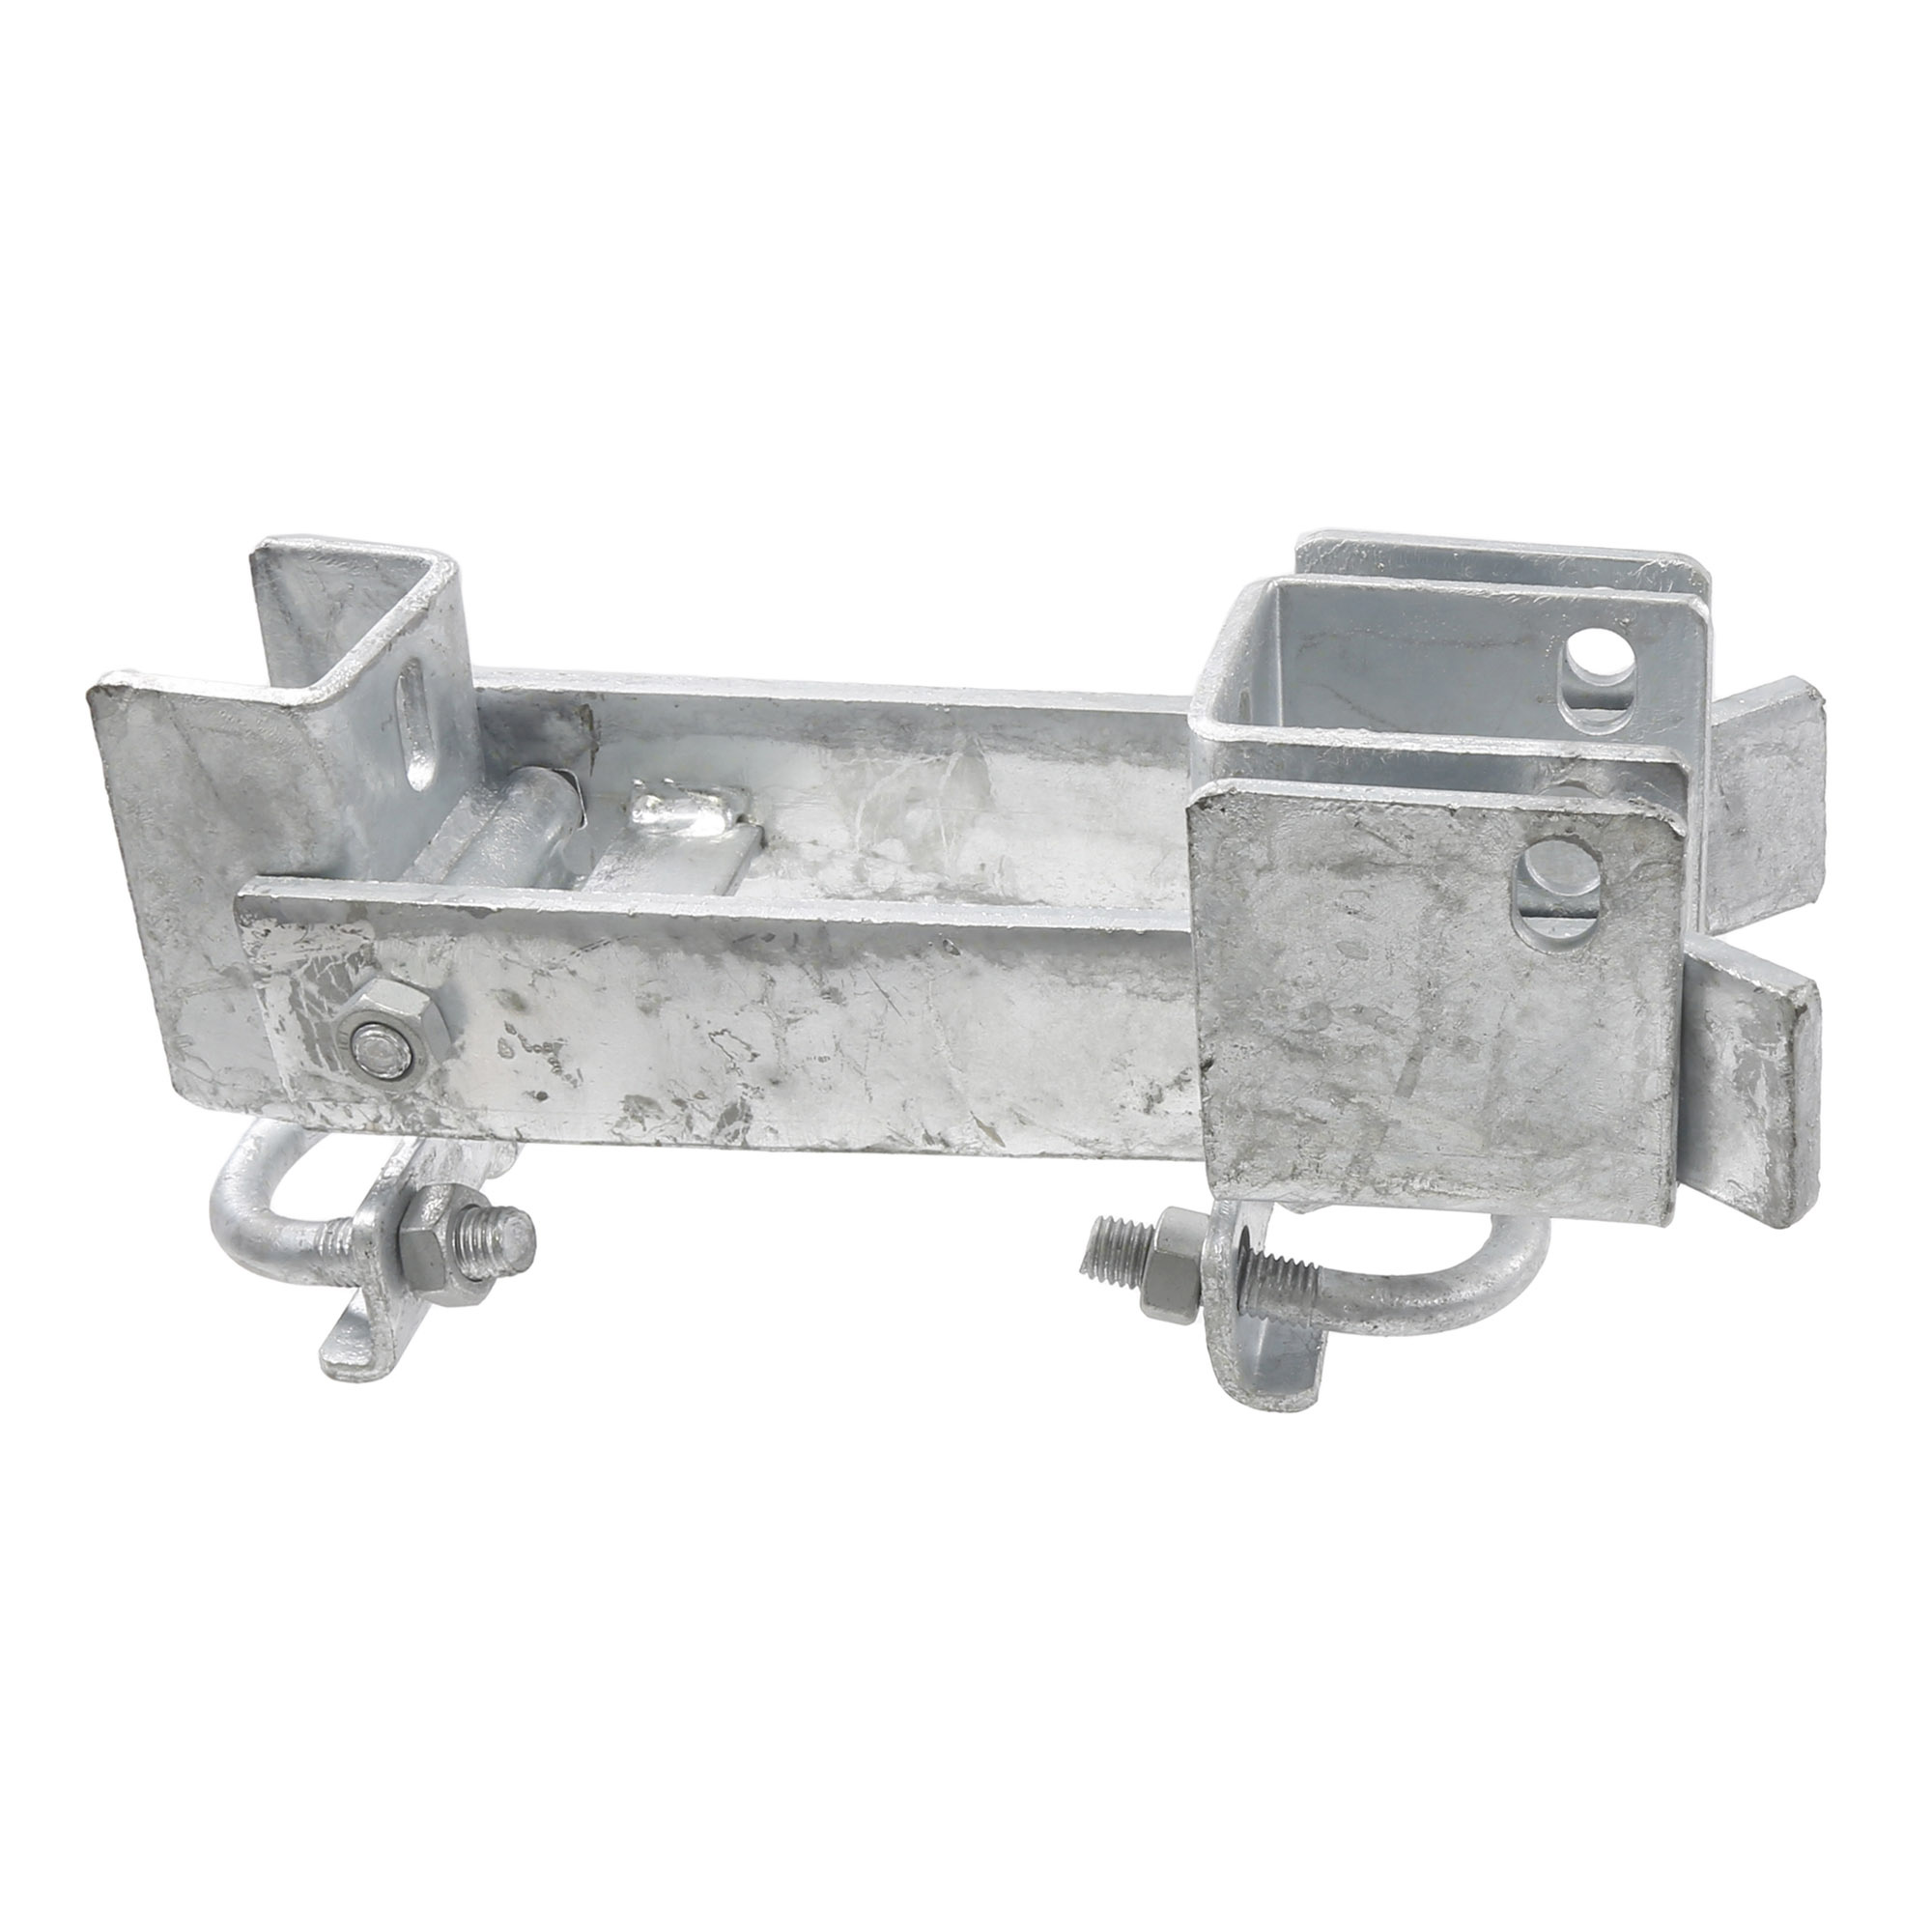 Double Strong Arm Gate Latches